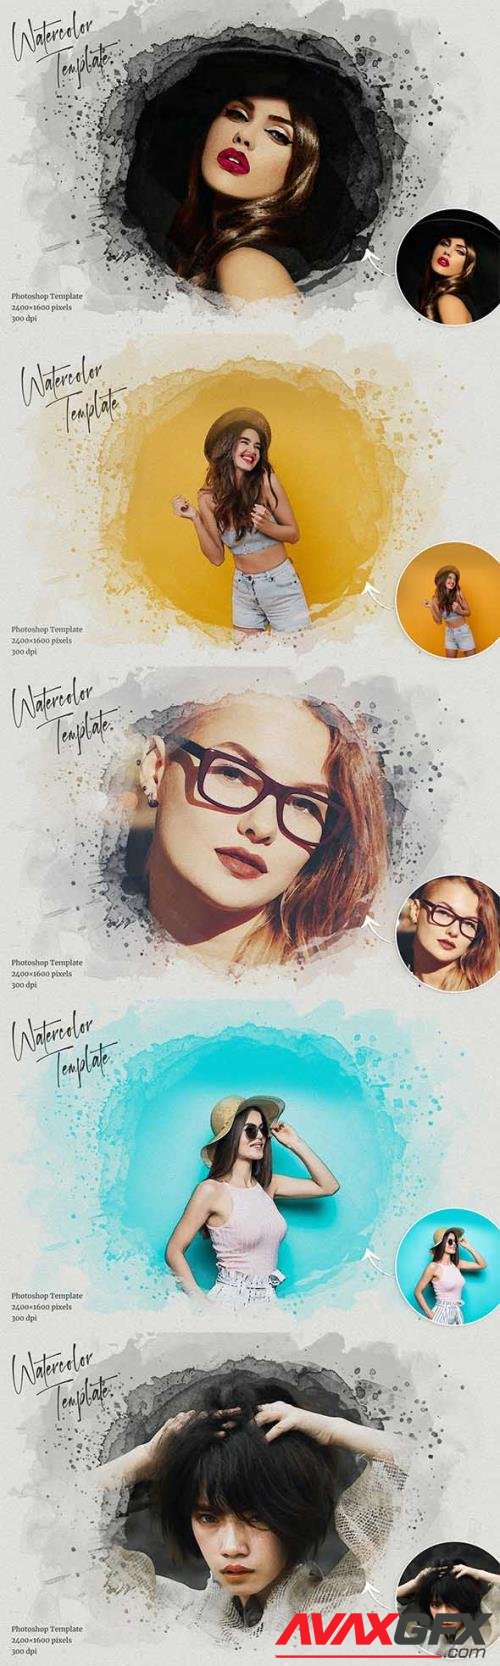 Watercolor Photoshop Template